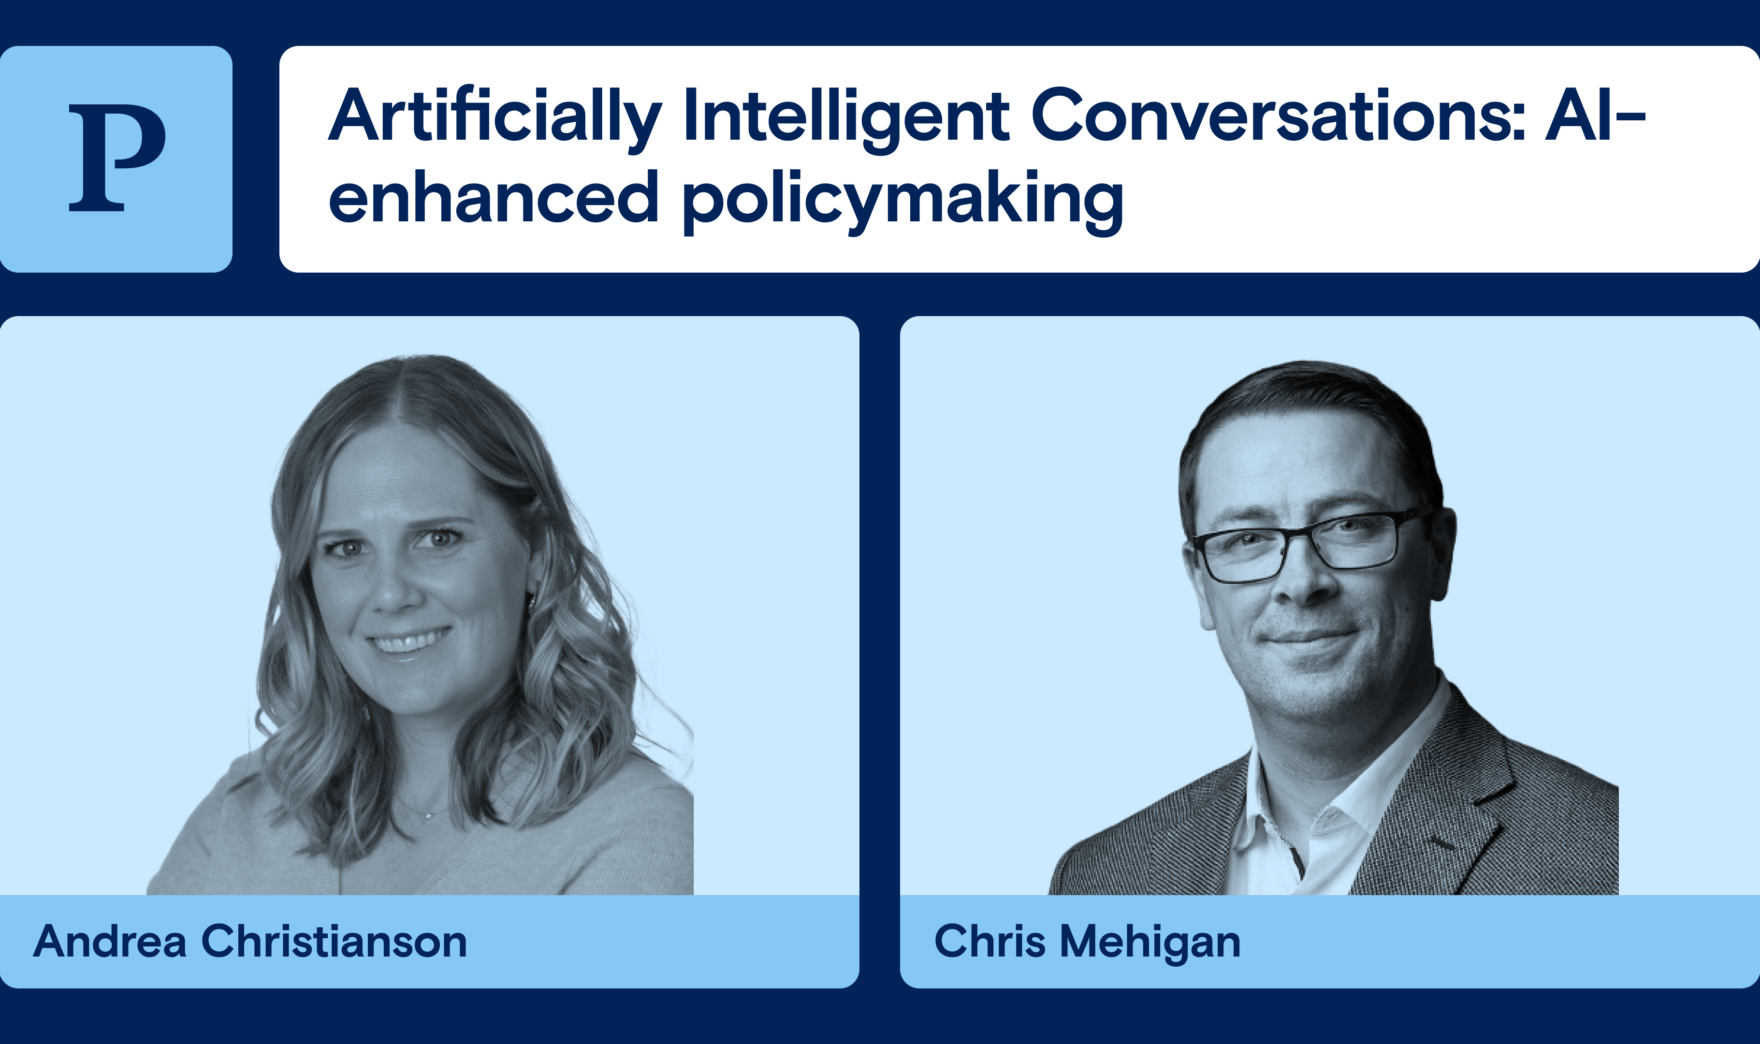 Artificially Intelligent Conversations: AI-enhanced policymaking